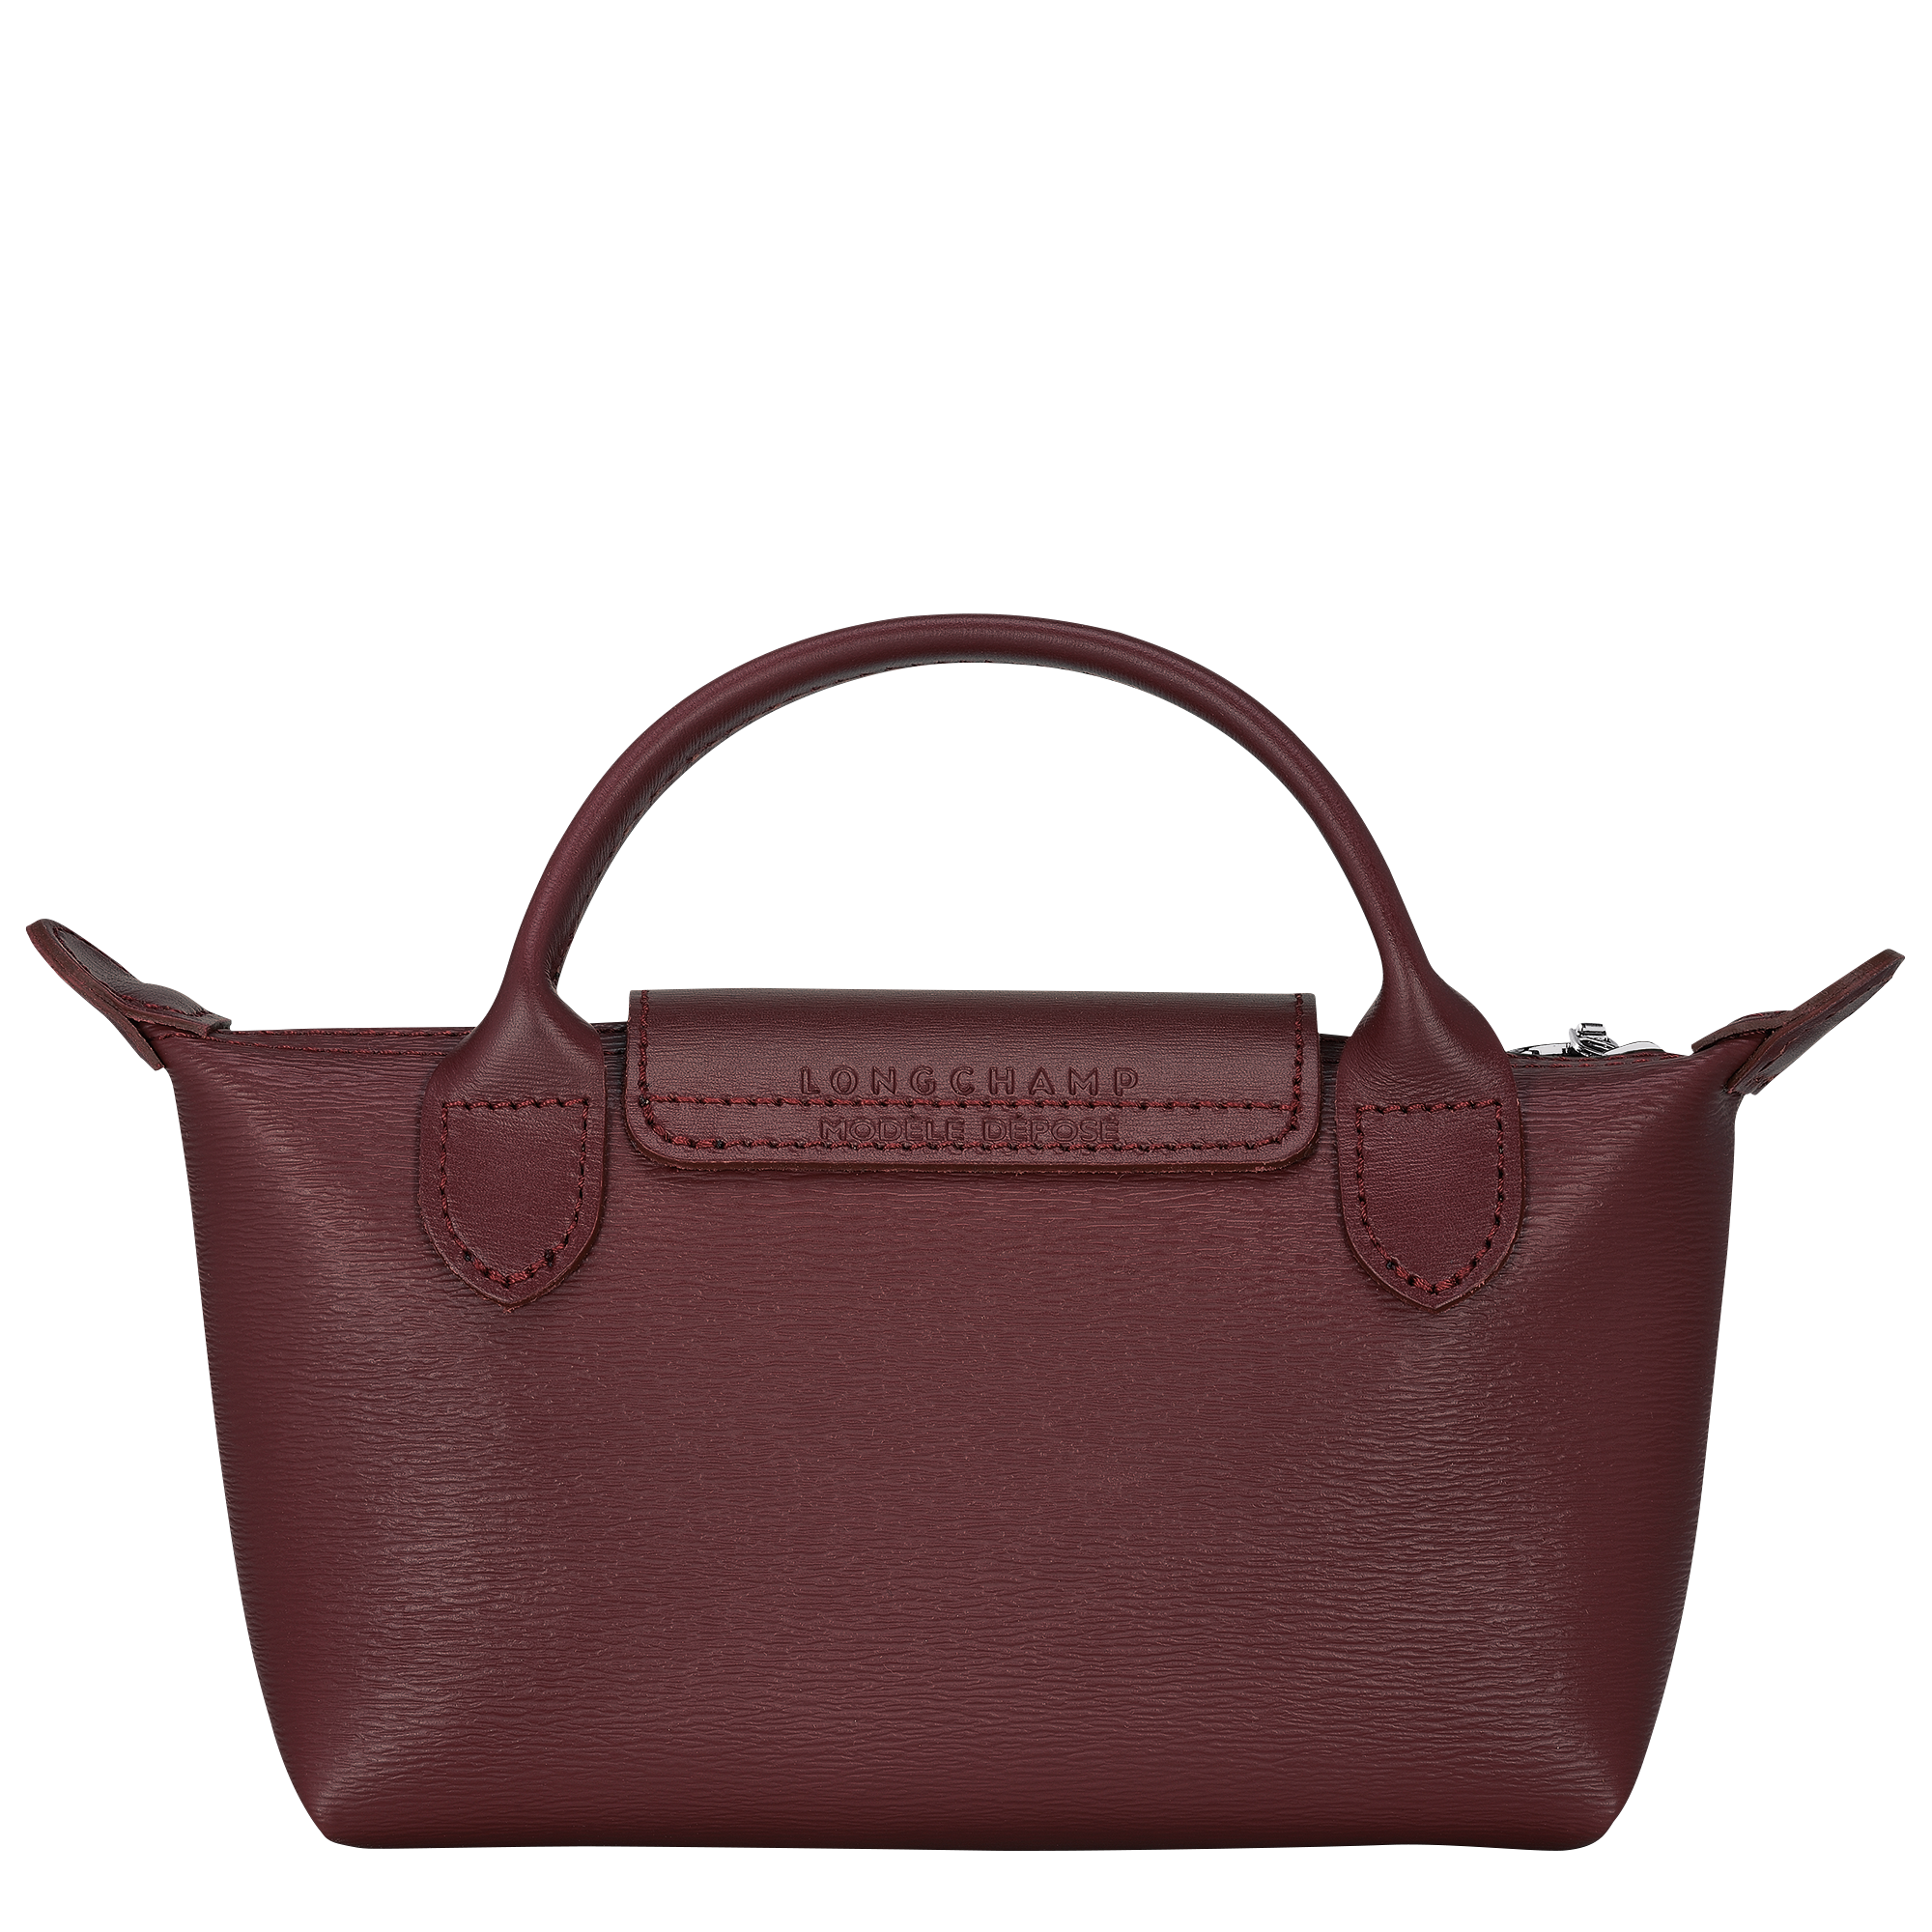 Longchamp LE PLIAGE CITY - Pouch with handle in Plum - 3 (SKU: 34175HYQ261)